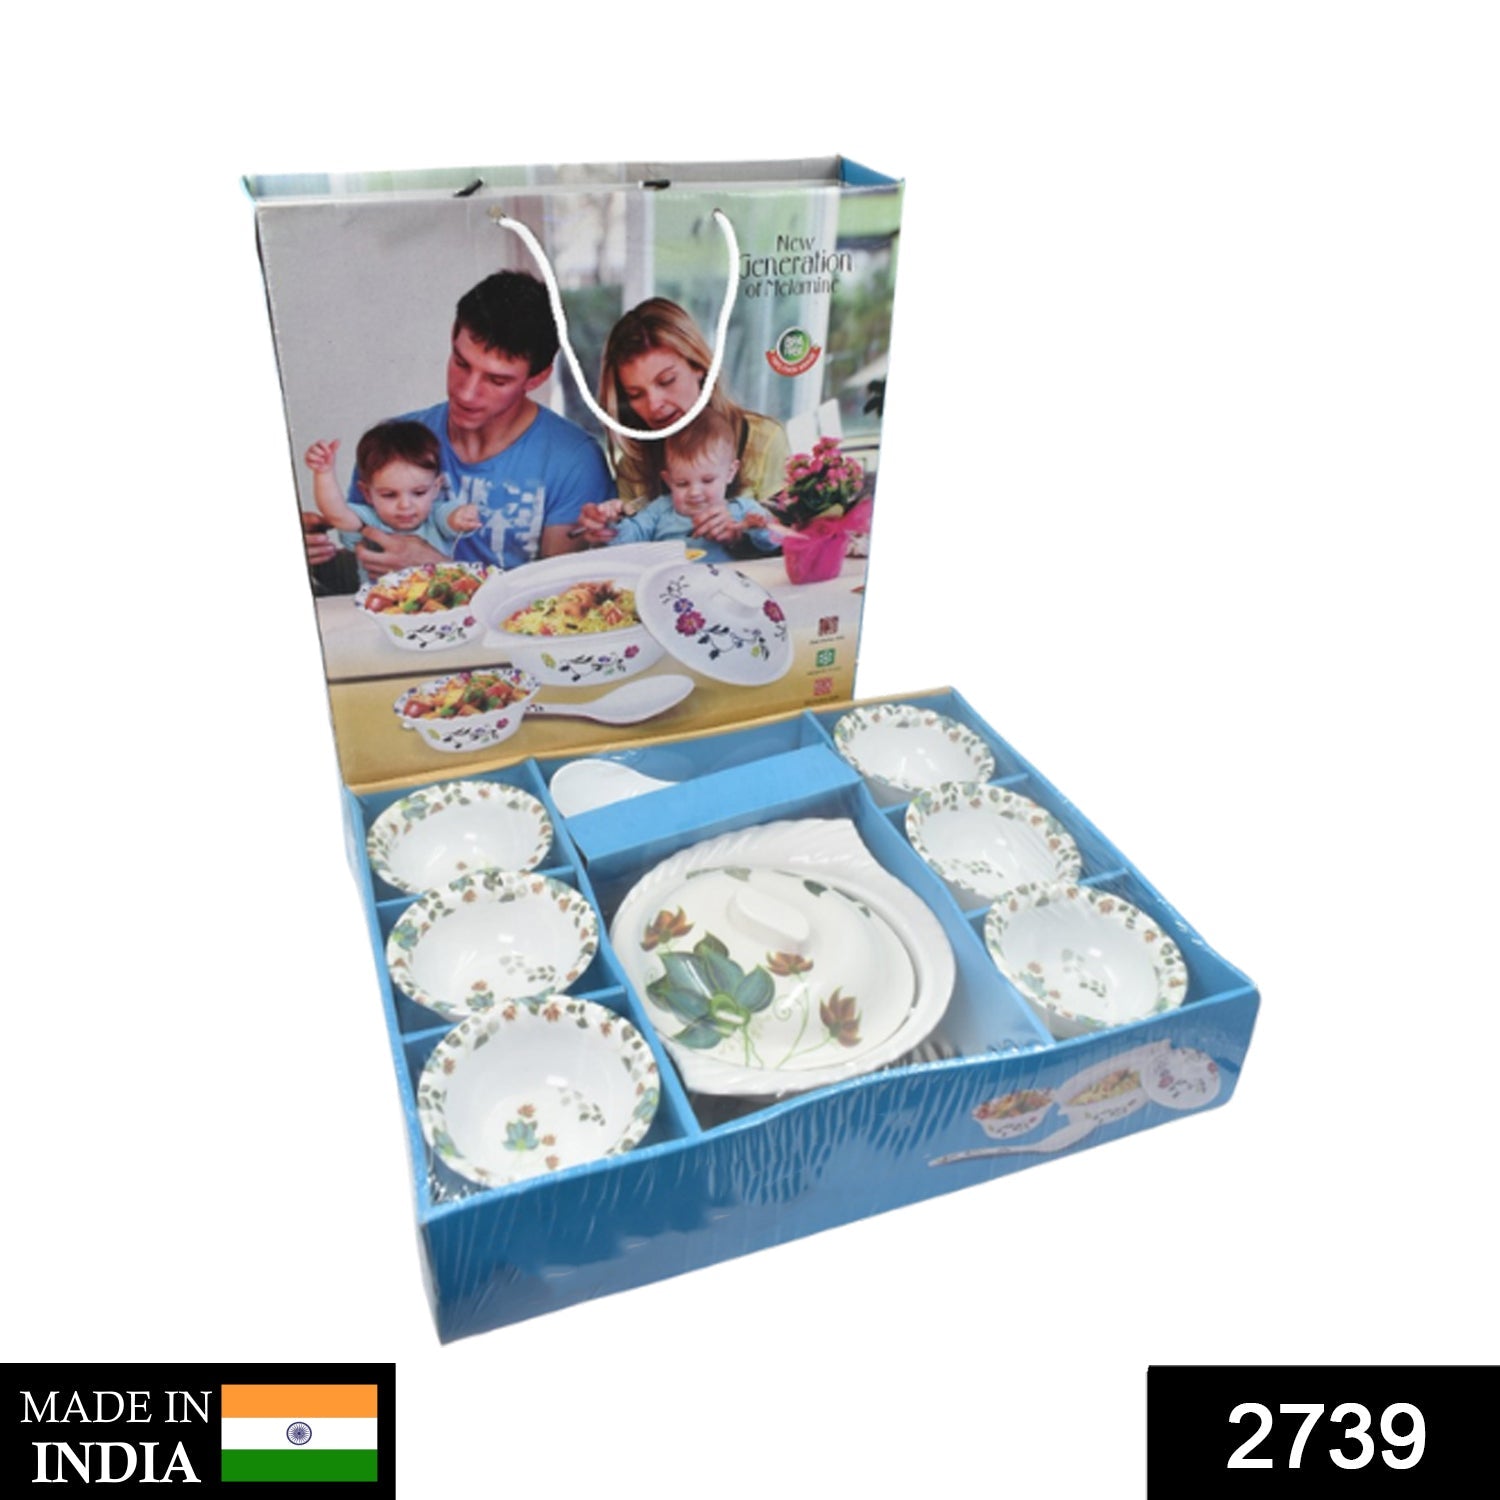 2739 9 Pc Pudding Set used as a cutlery set for serving food purposes and sweet dishes and all in all kinds of household and official places etc.